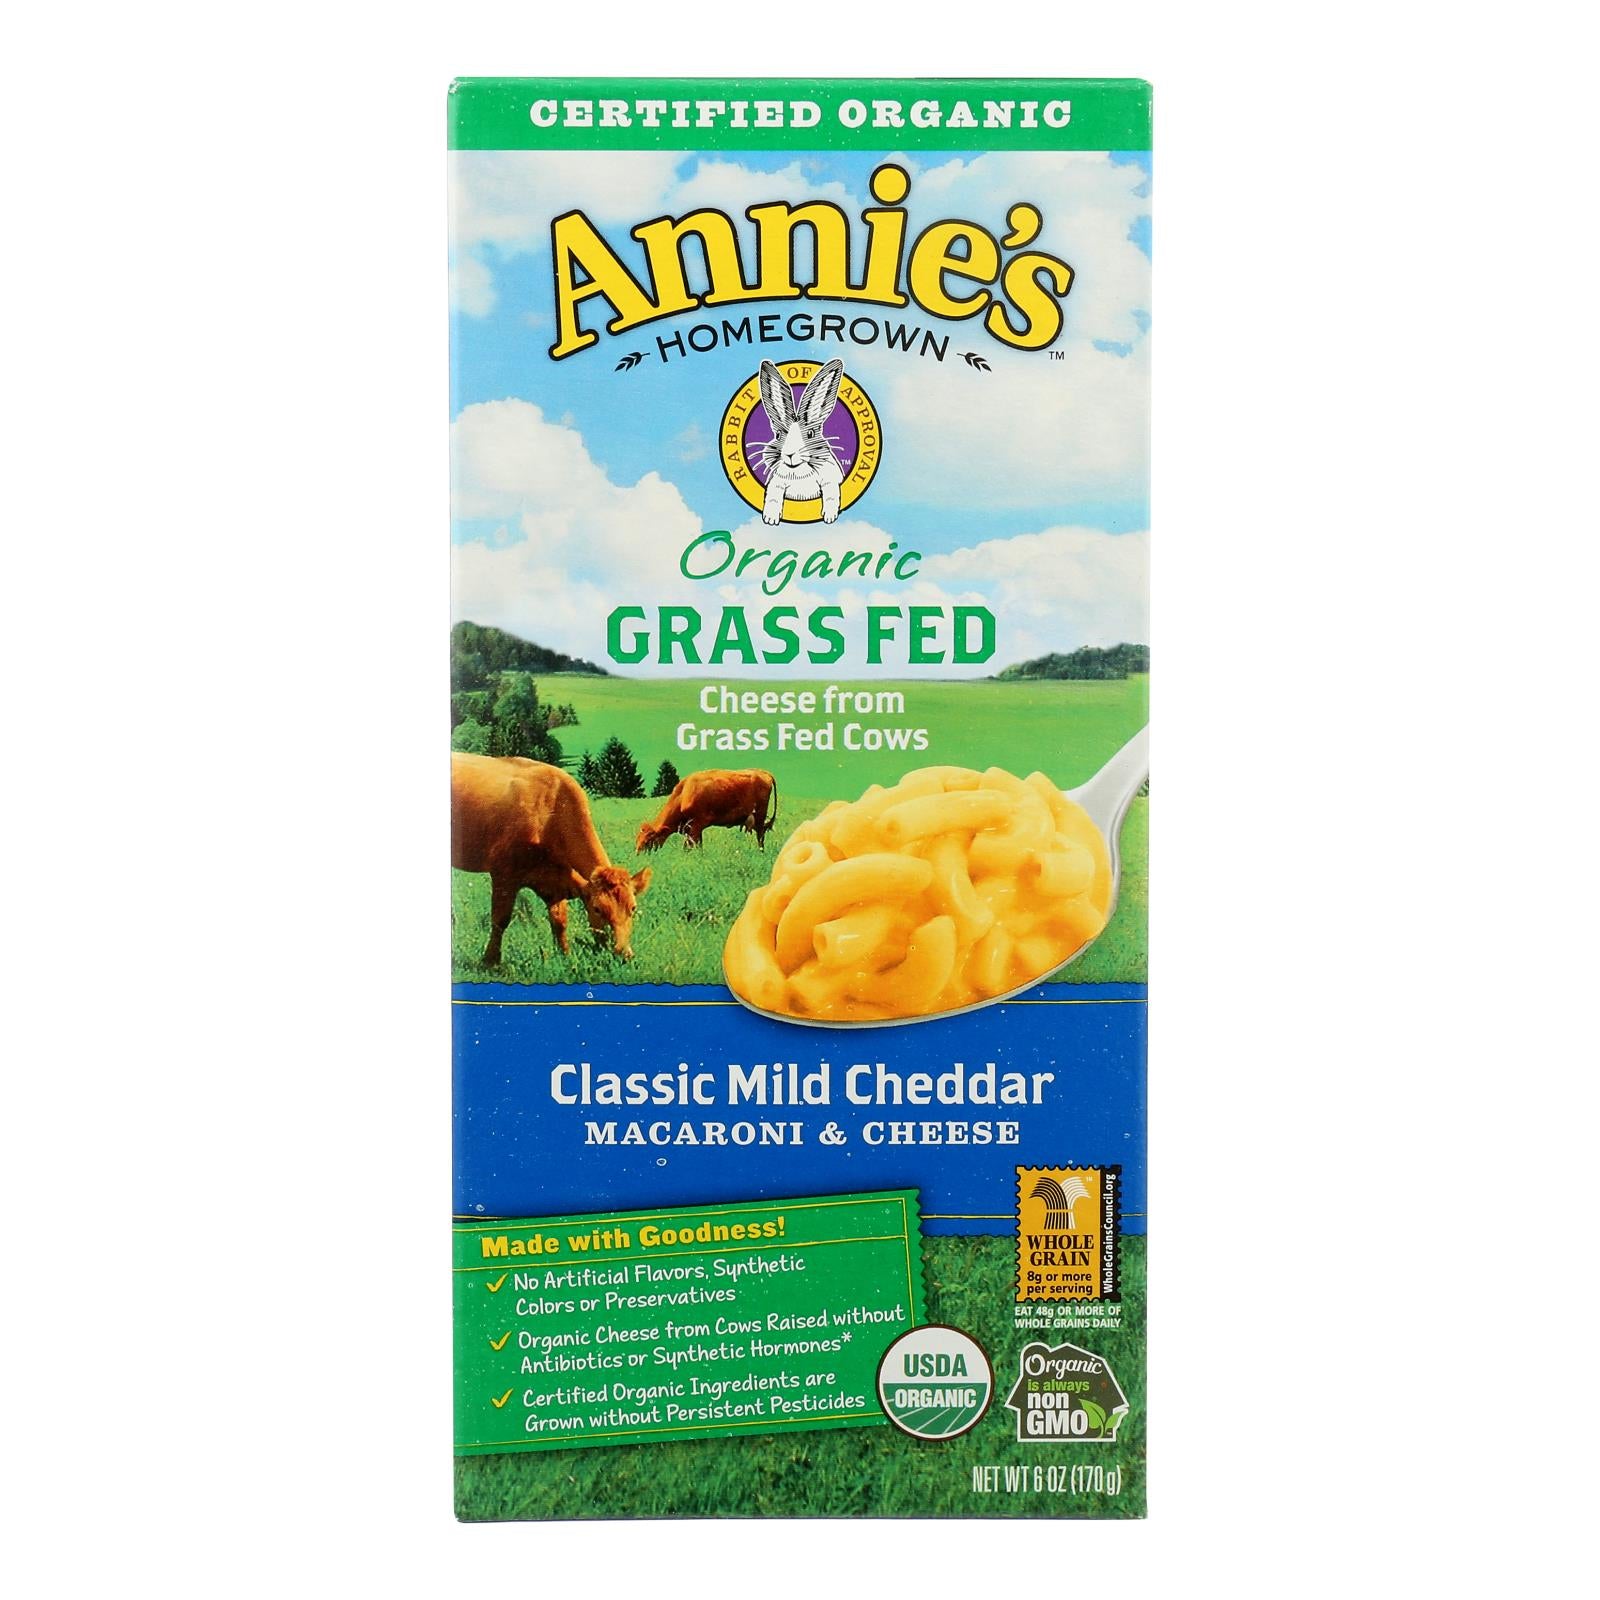 Annies Homegrown Macaroni And Cheese - Organic - Grass Fed - Classic Mild Cheddar - 6 Oz - Case Of 12